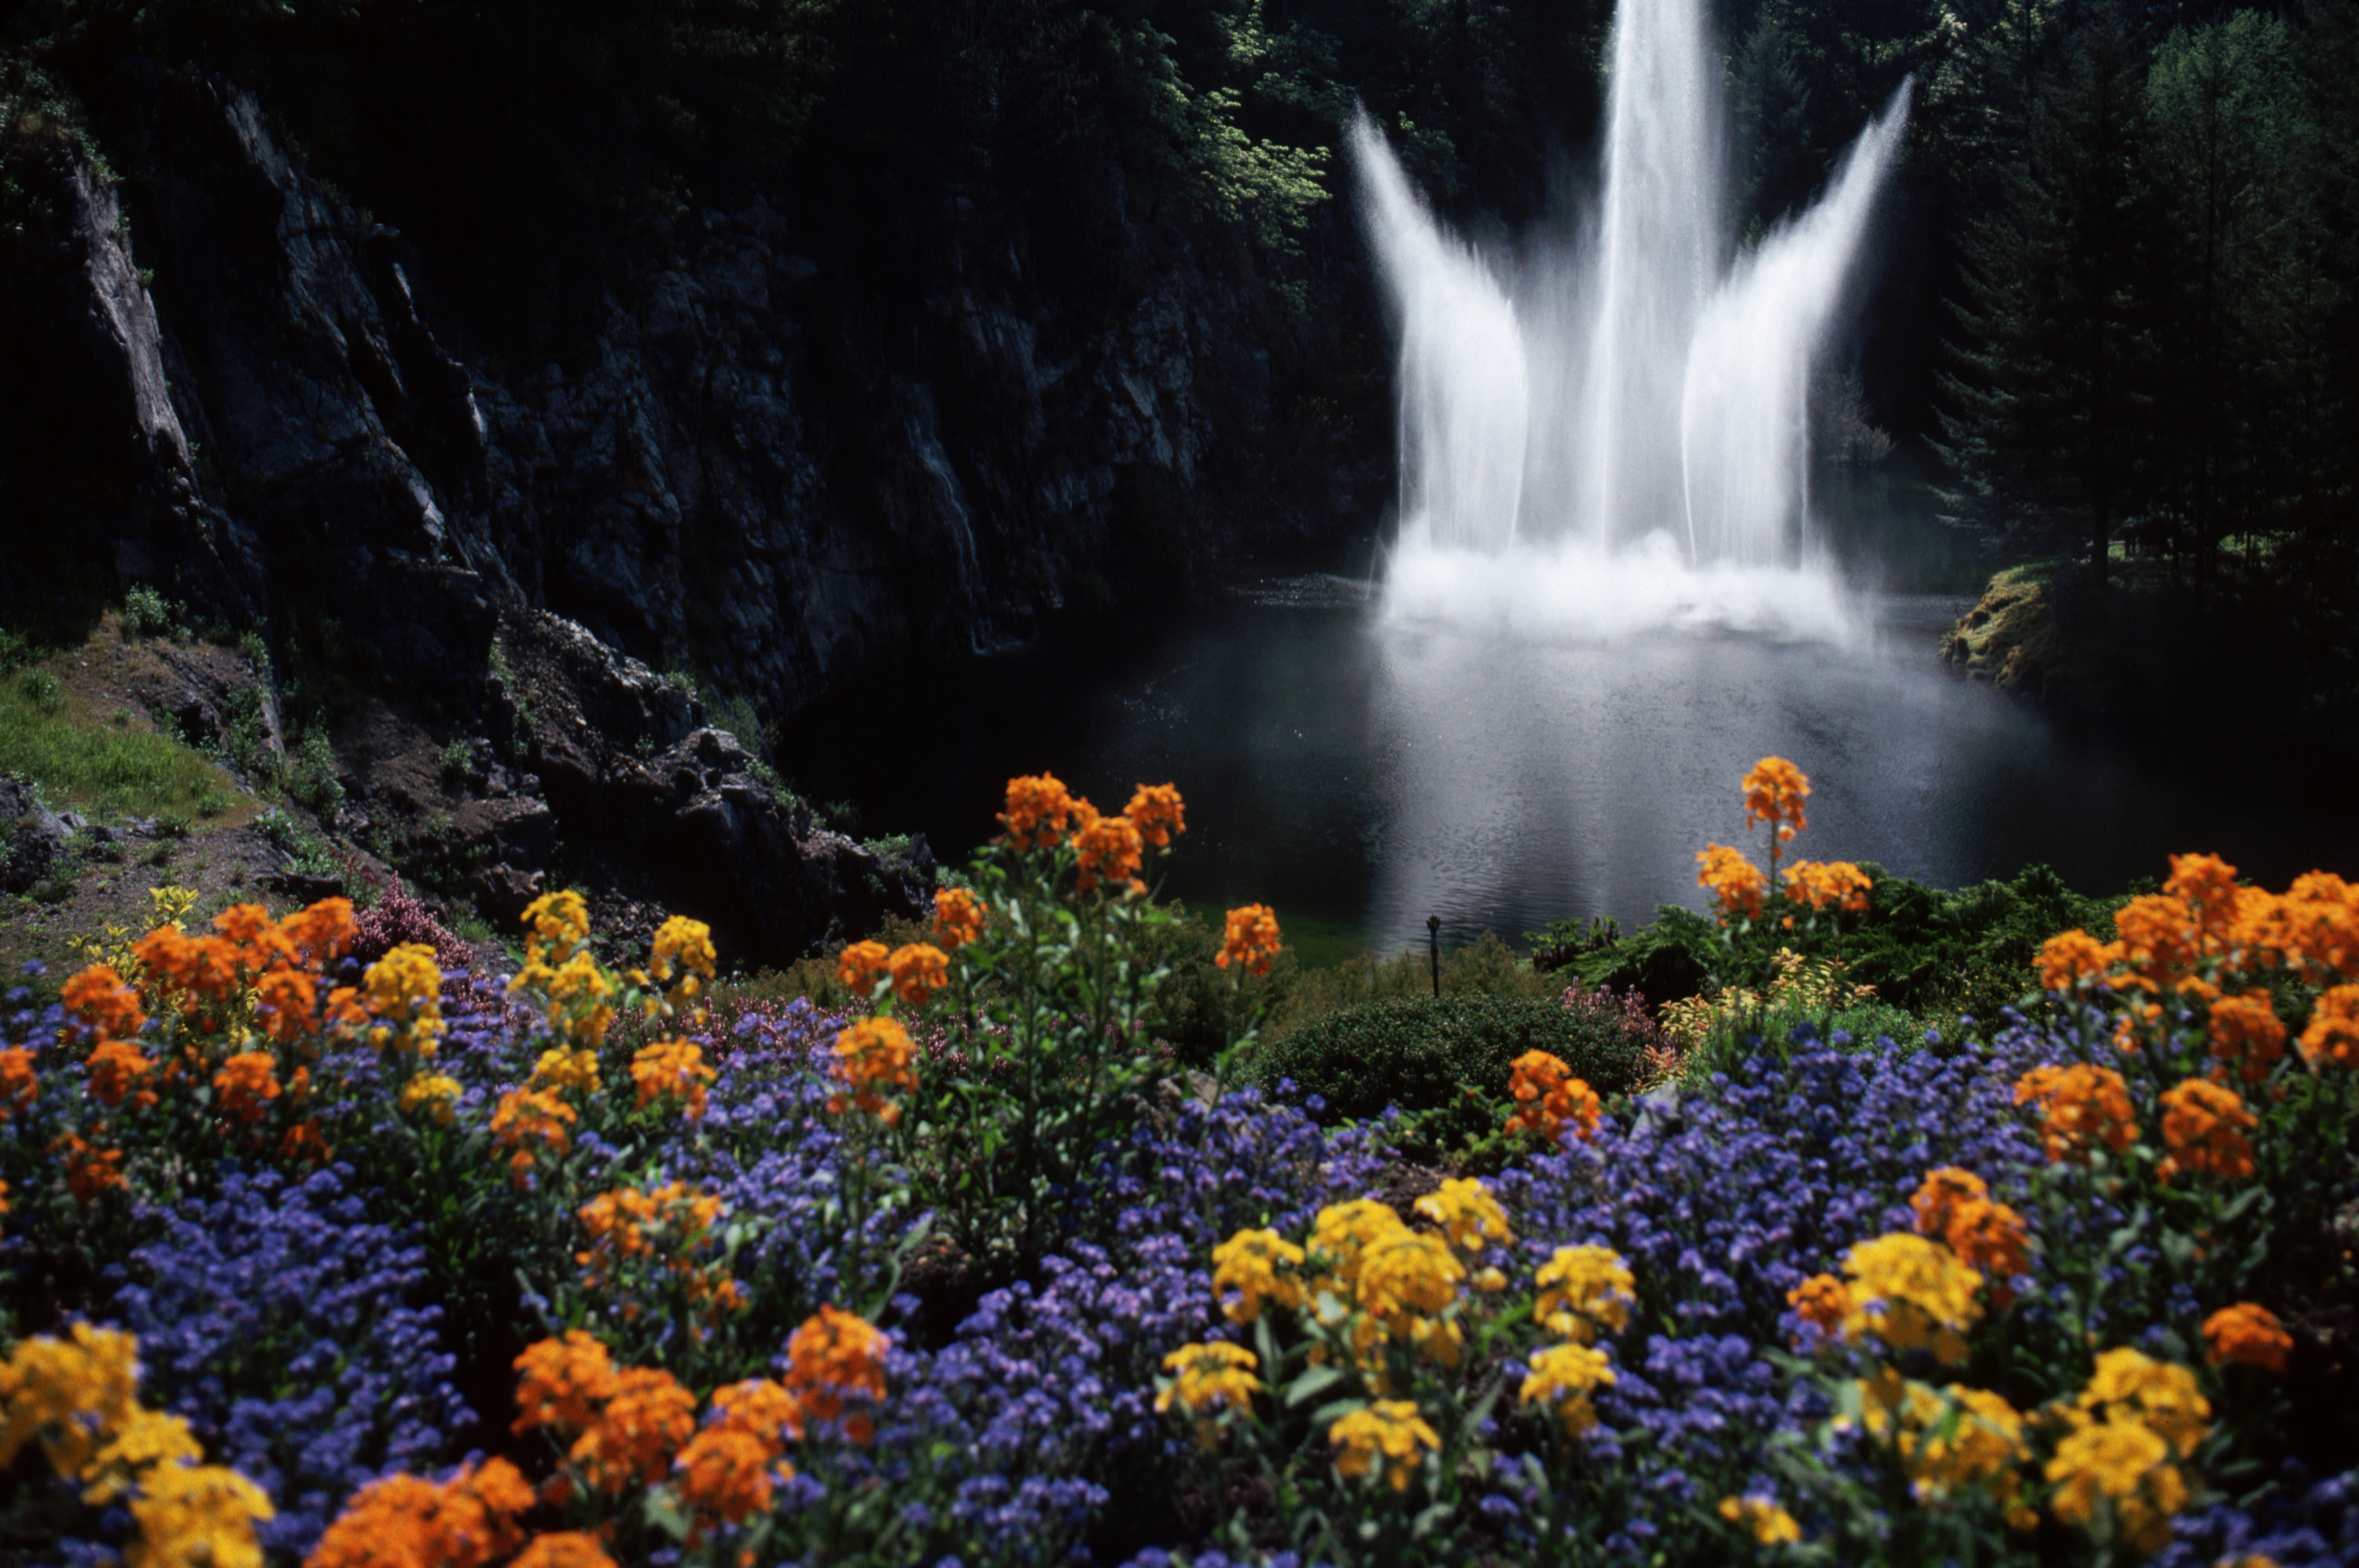 Flowers and a waterfall at the Butchart Gardens in Victoria, British Columbia